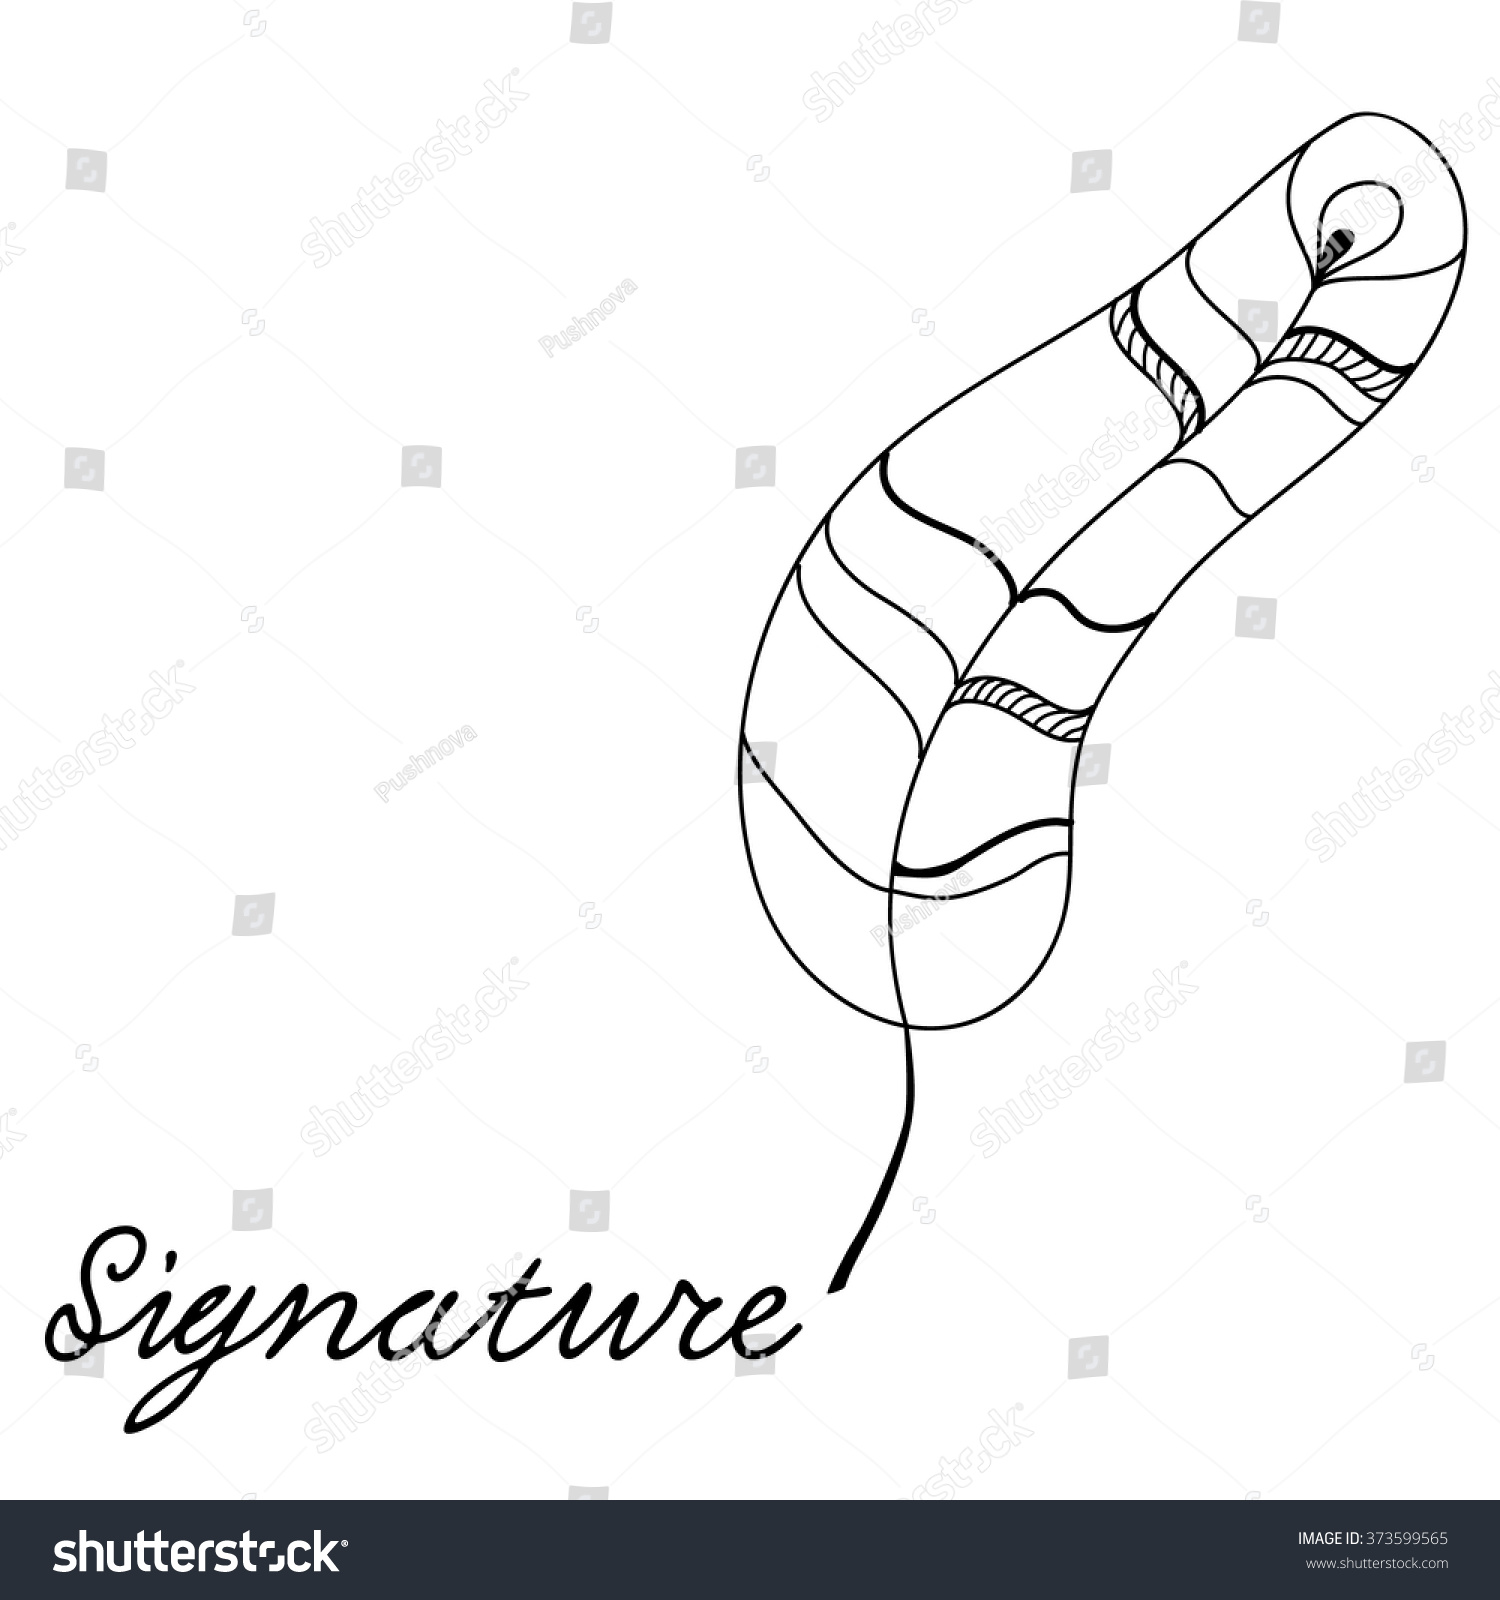 Vector Illustration Of Pen And Signature. The Signature Icon. Pen And